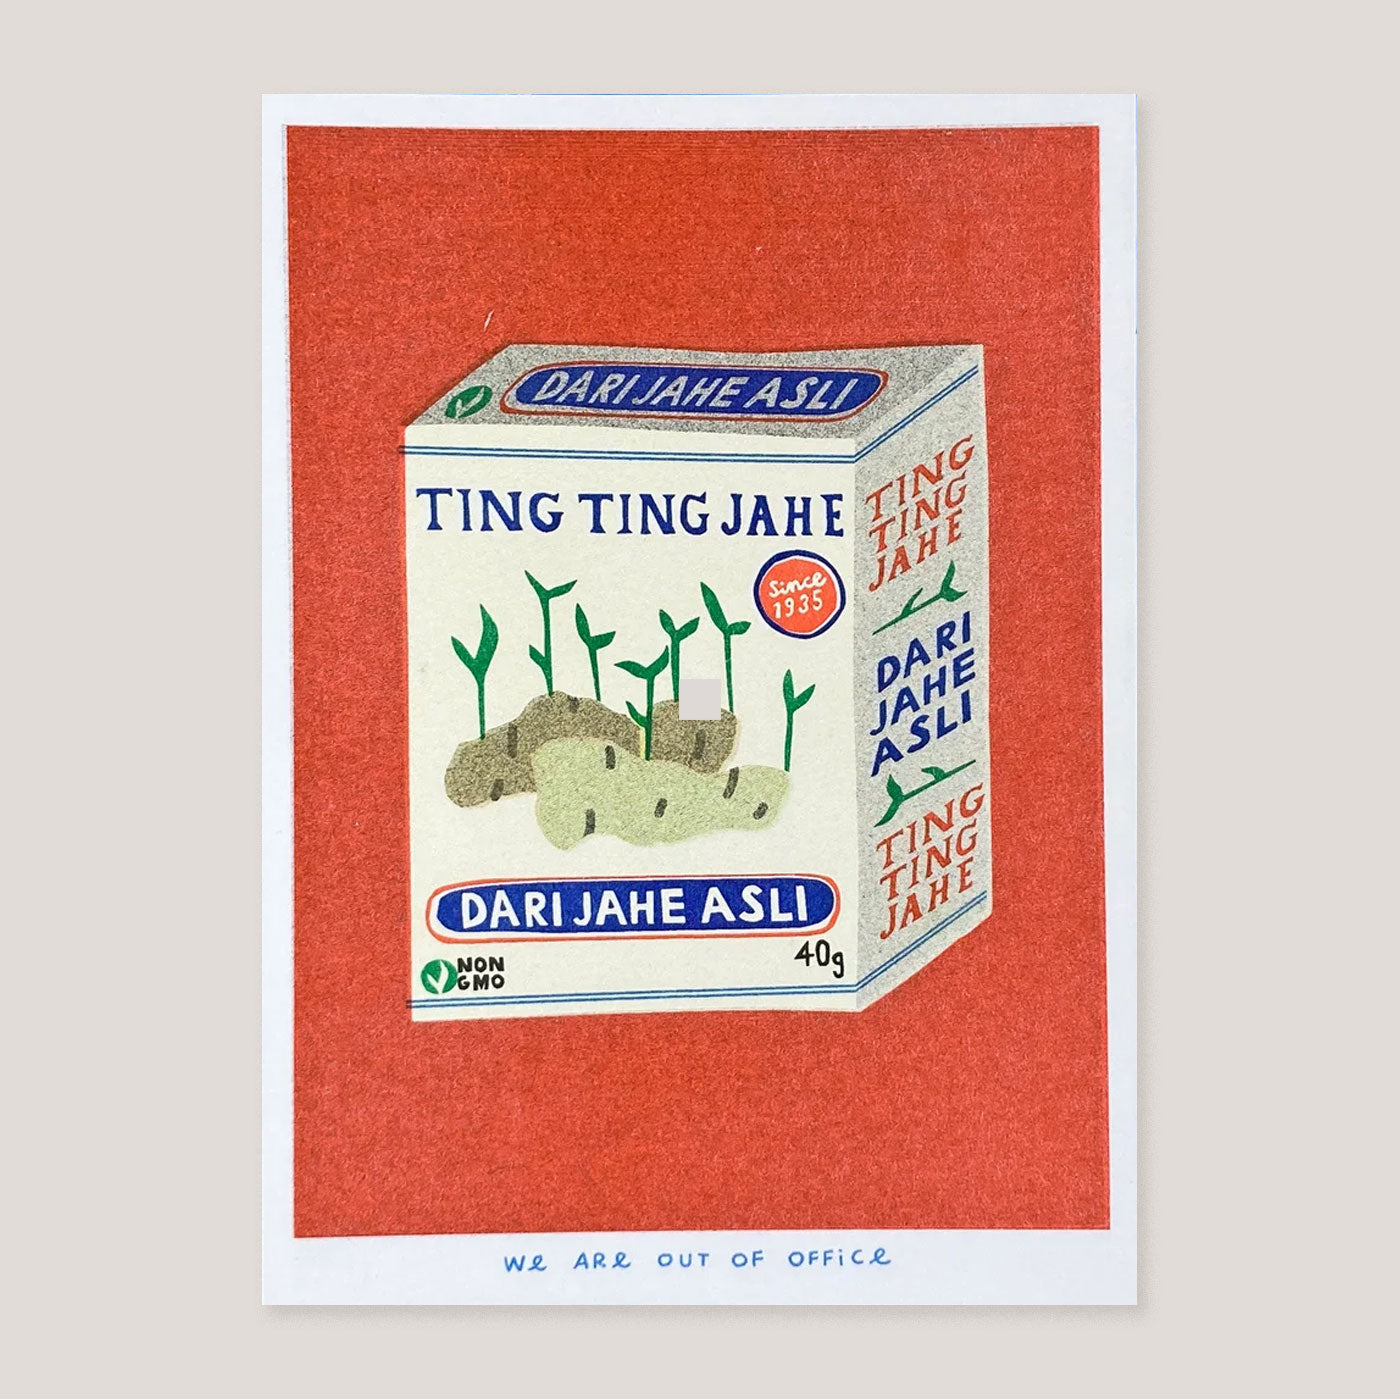 A Box Of Ting Ting Jahe Candy Print - We Are Out Of Office.